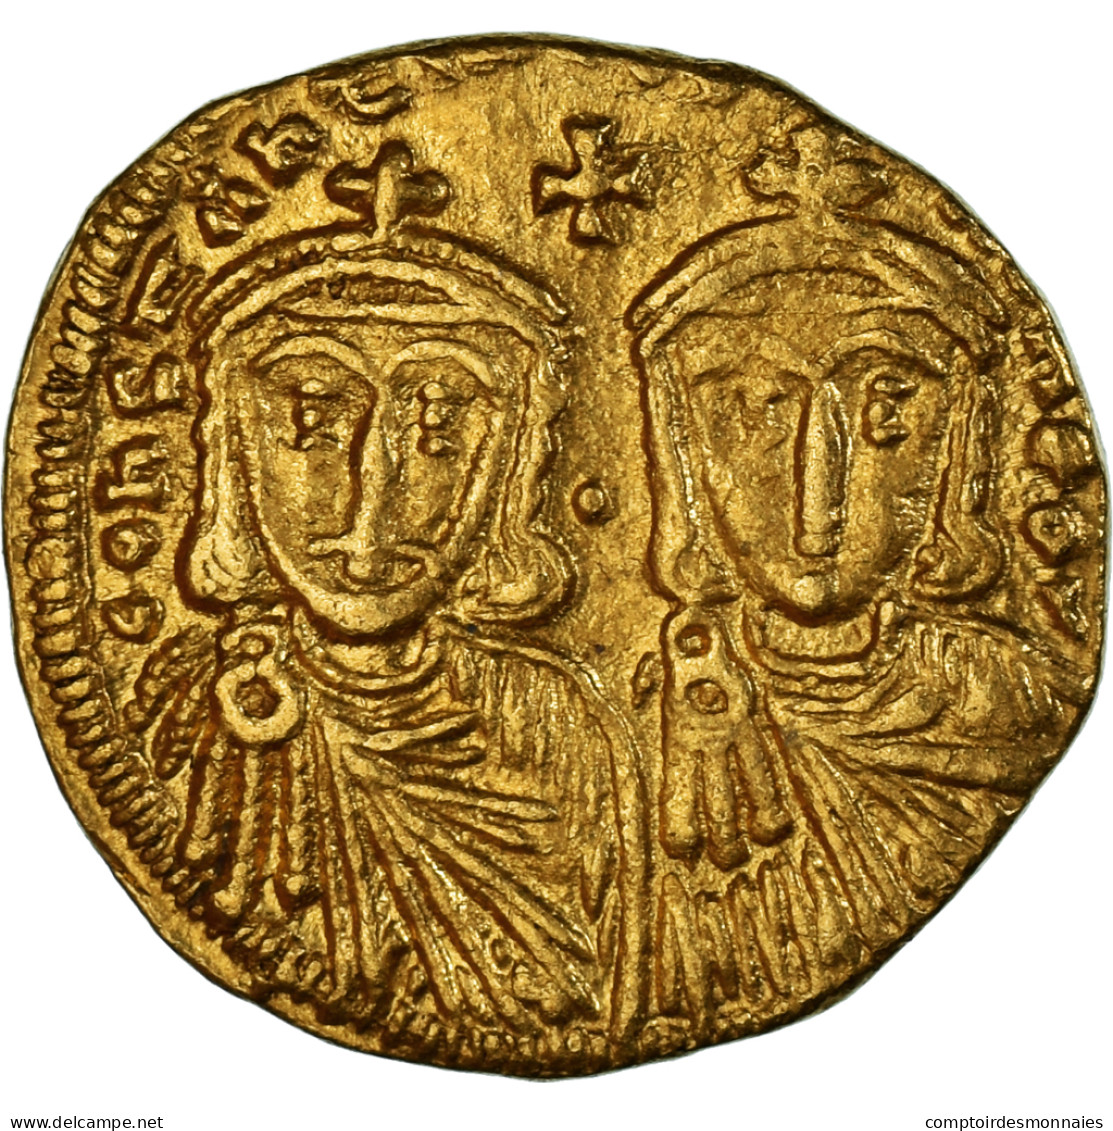 Monnaie, Constantine V Copronymus, With Leo IV And Leo III, Solidus, 756-764 - Byzantines